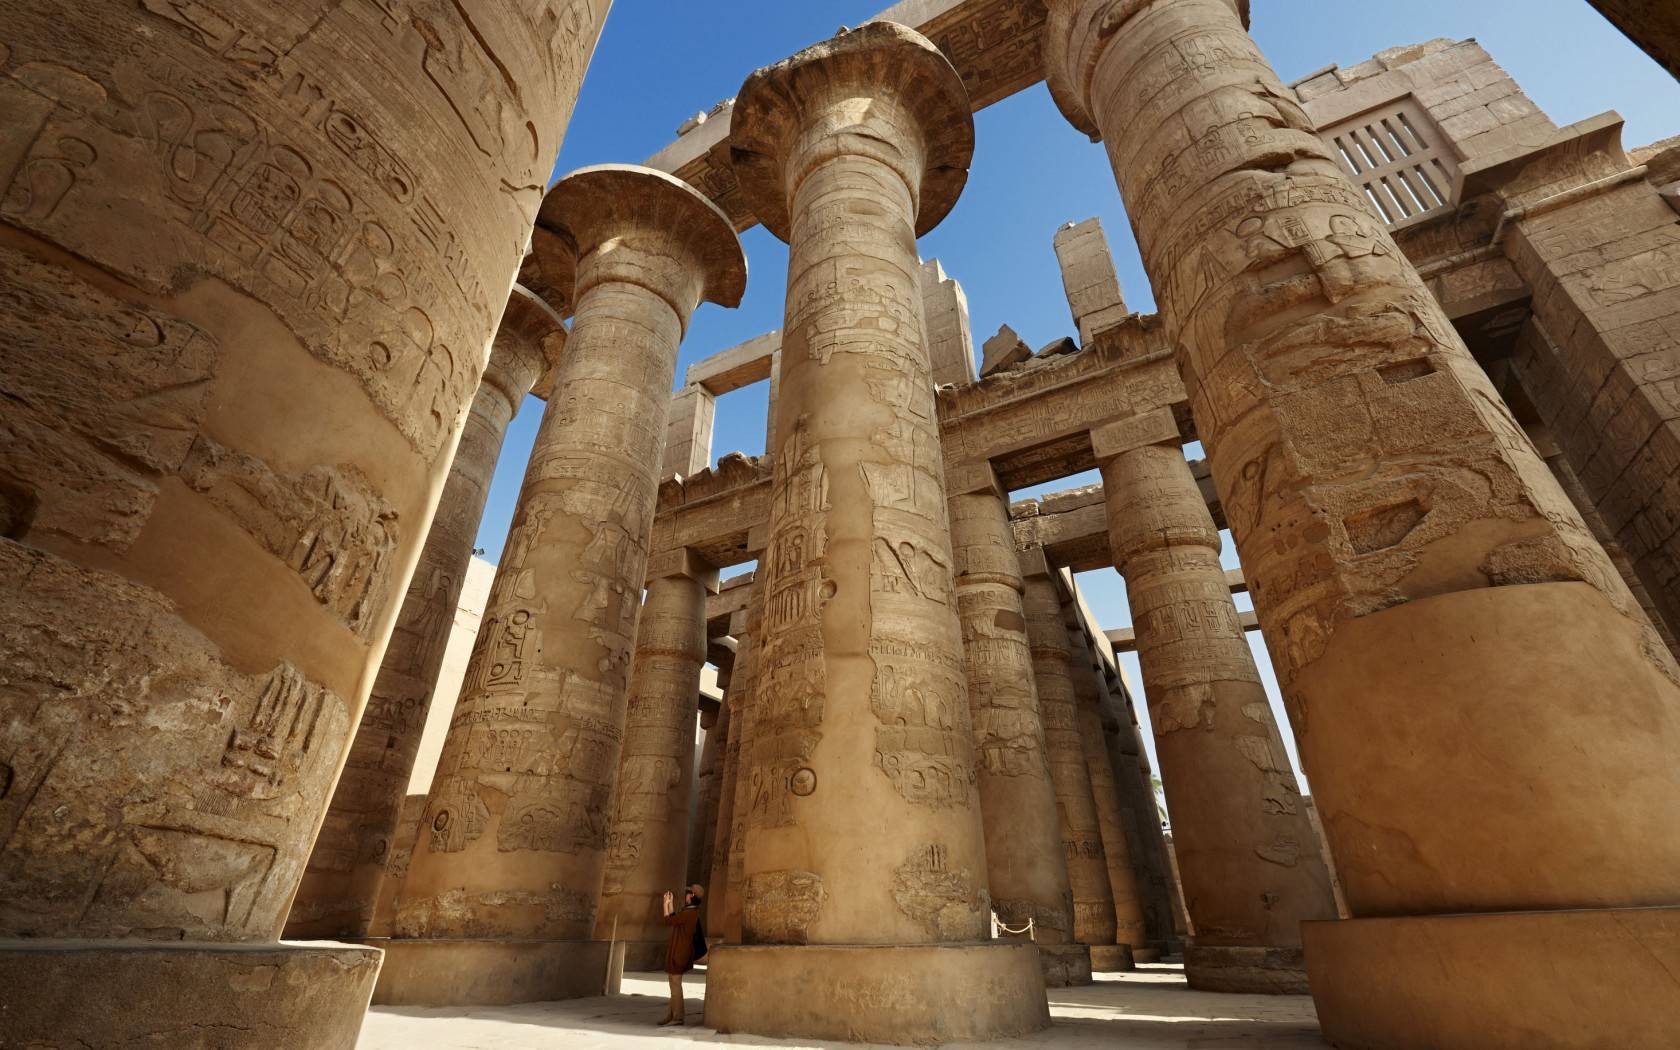 Day tour to Luxor super from Hurghada